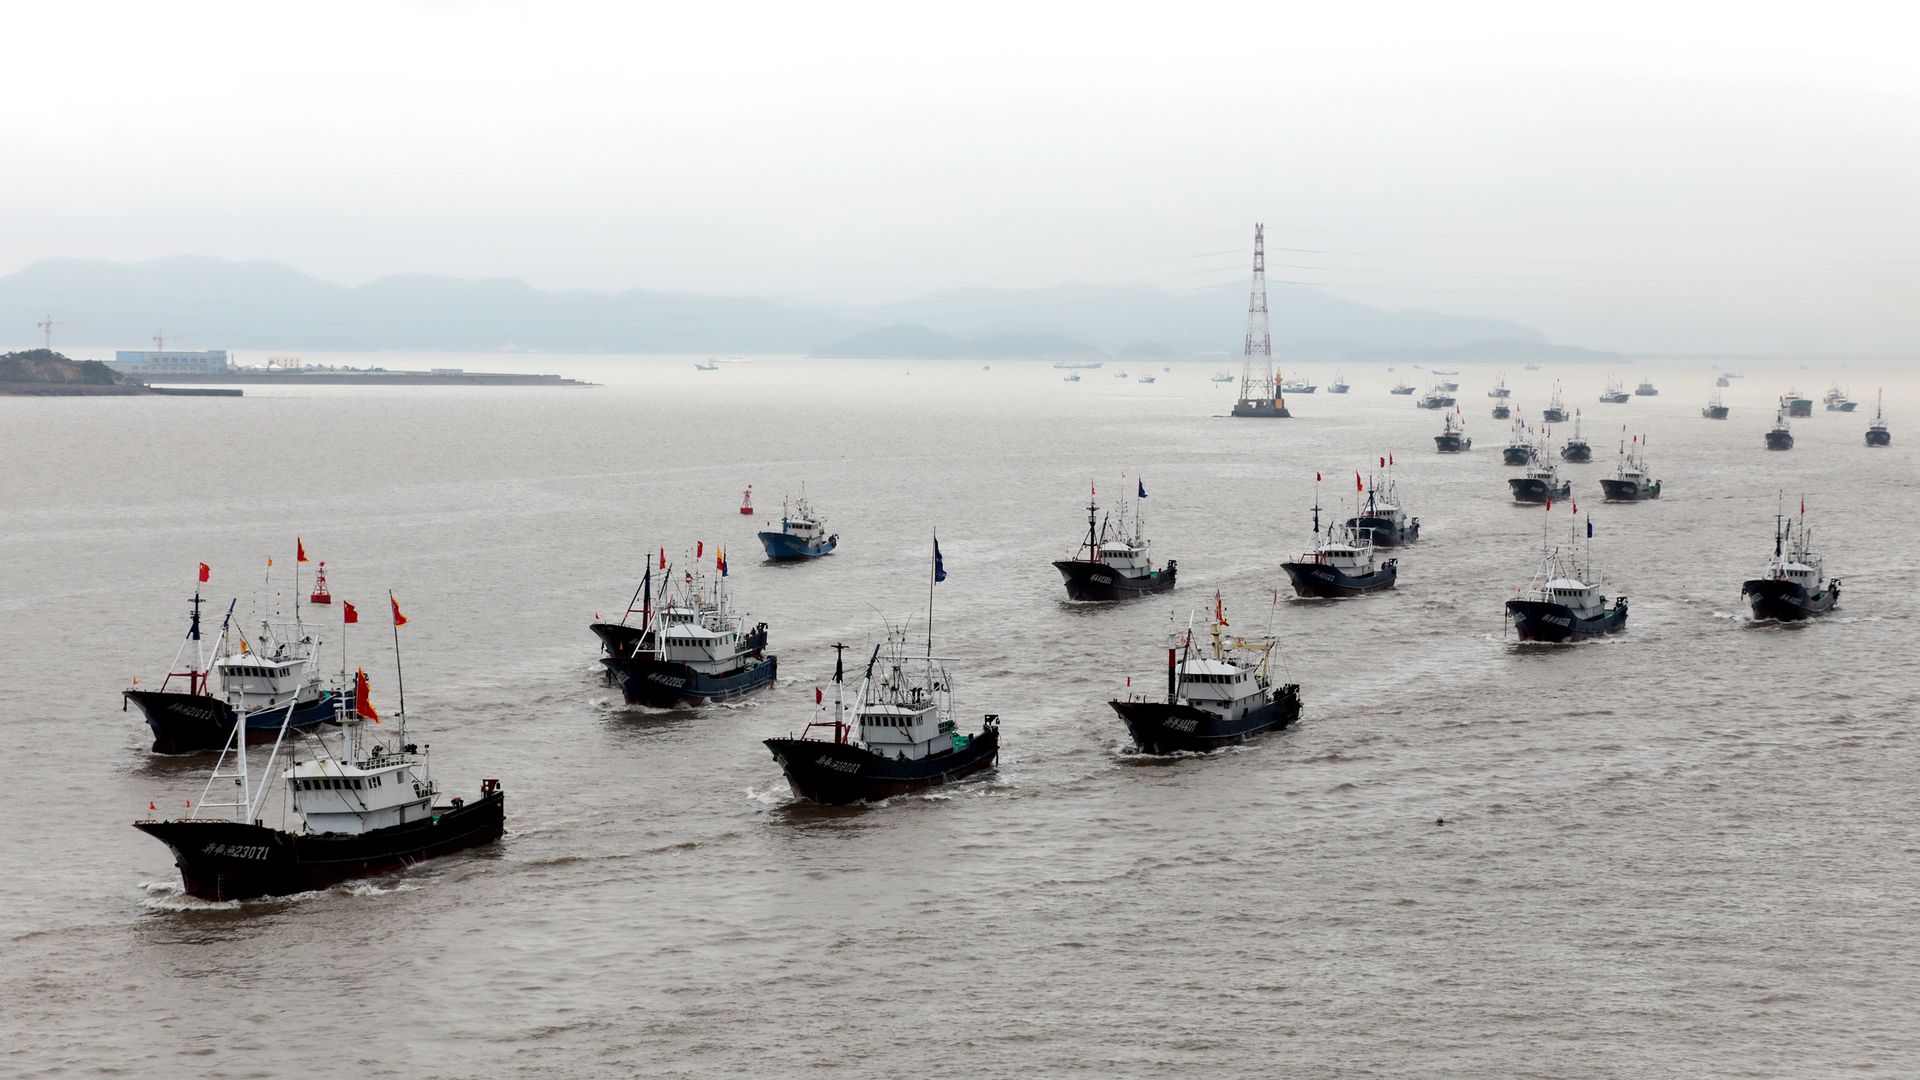 Chinese boats set sail for fishing after the four-and-a-half-month fishing ban on the East China Sea.